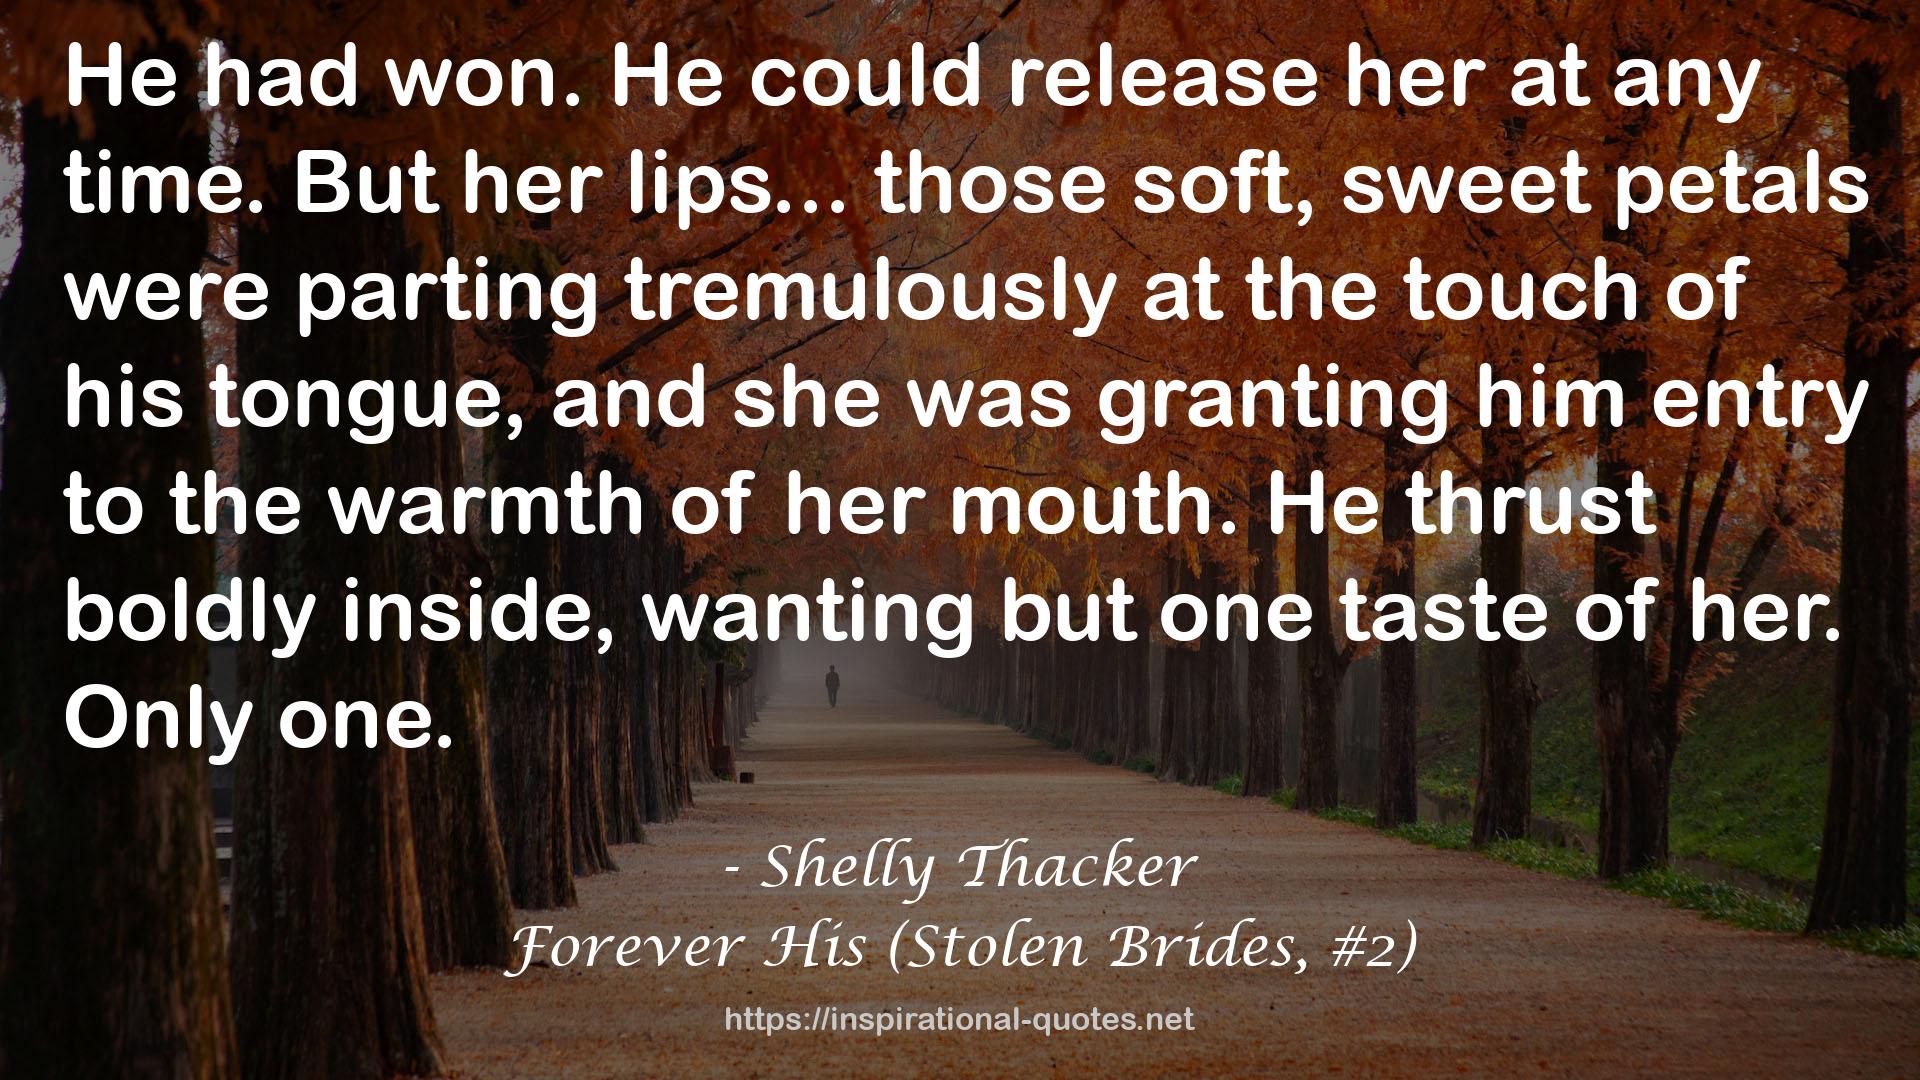 Forever His (Stolen Brides, #2) QUOTES